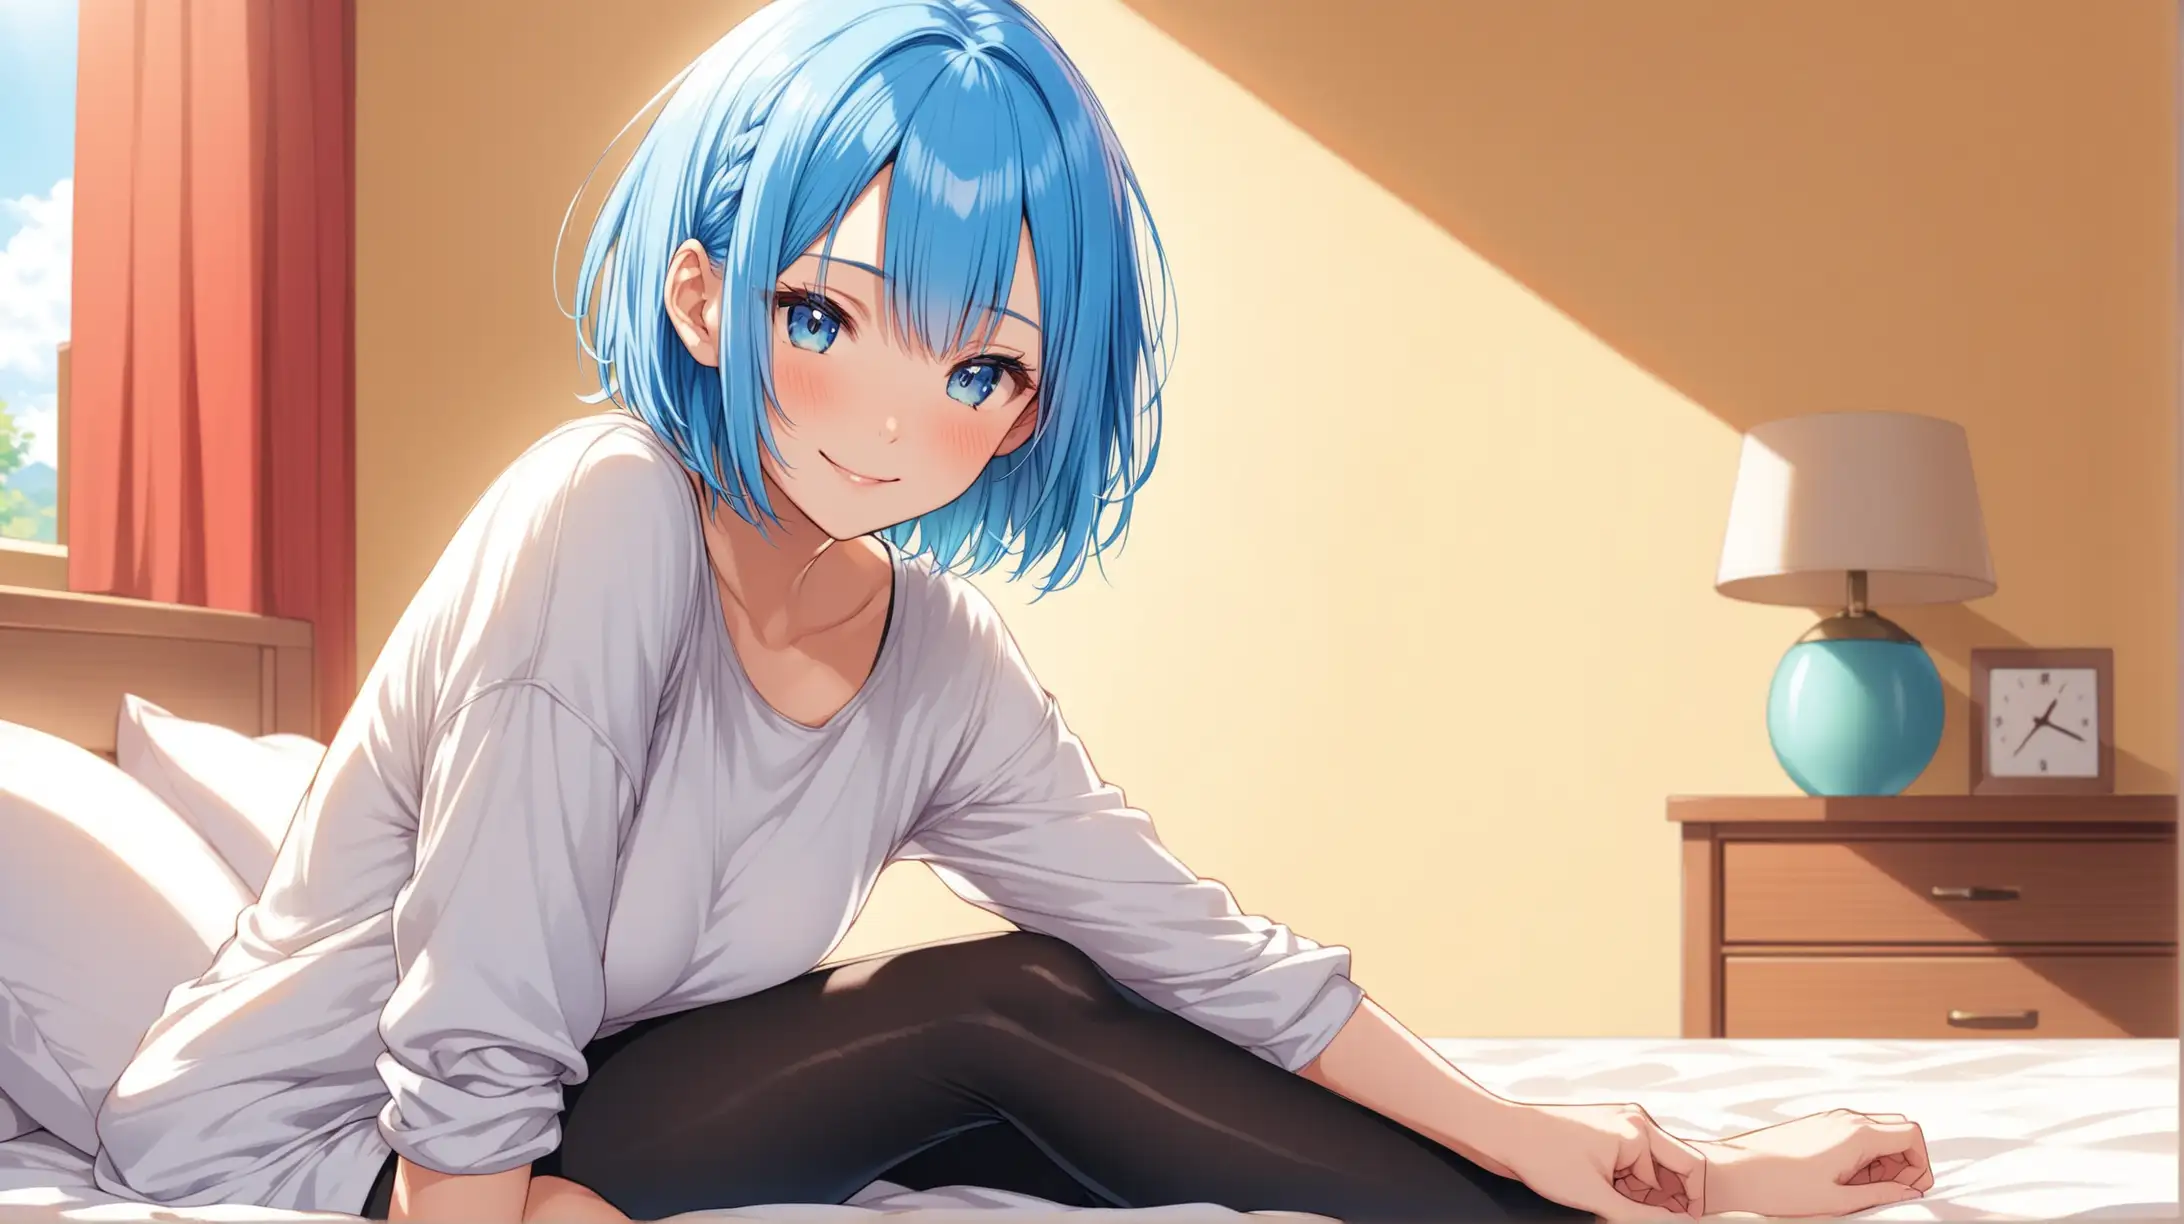 Draw the character Rem, high quality, in a relaxed pose, indoors, on a sunny day, with a bed in the background, wearing leggings and a shirt, smiling lovingly at the viewer